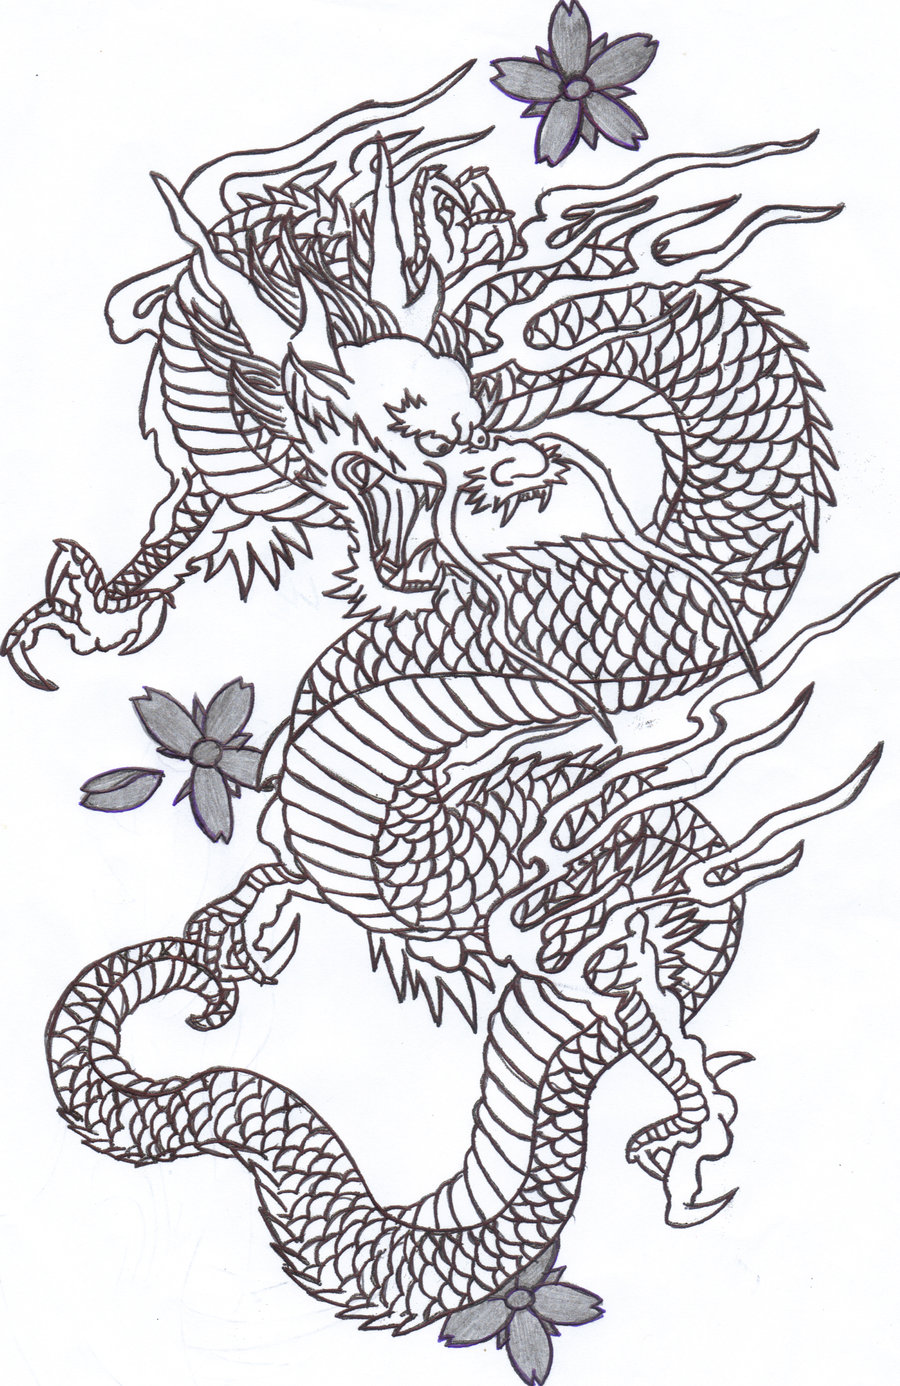 Chinese Dragons Drawings - Gallery